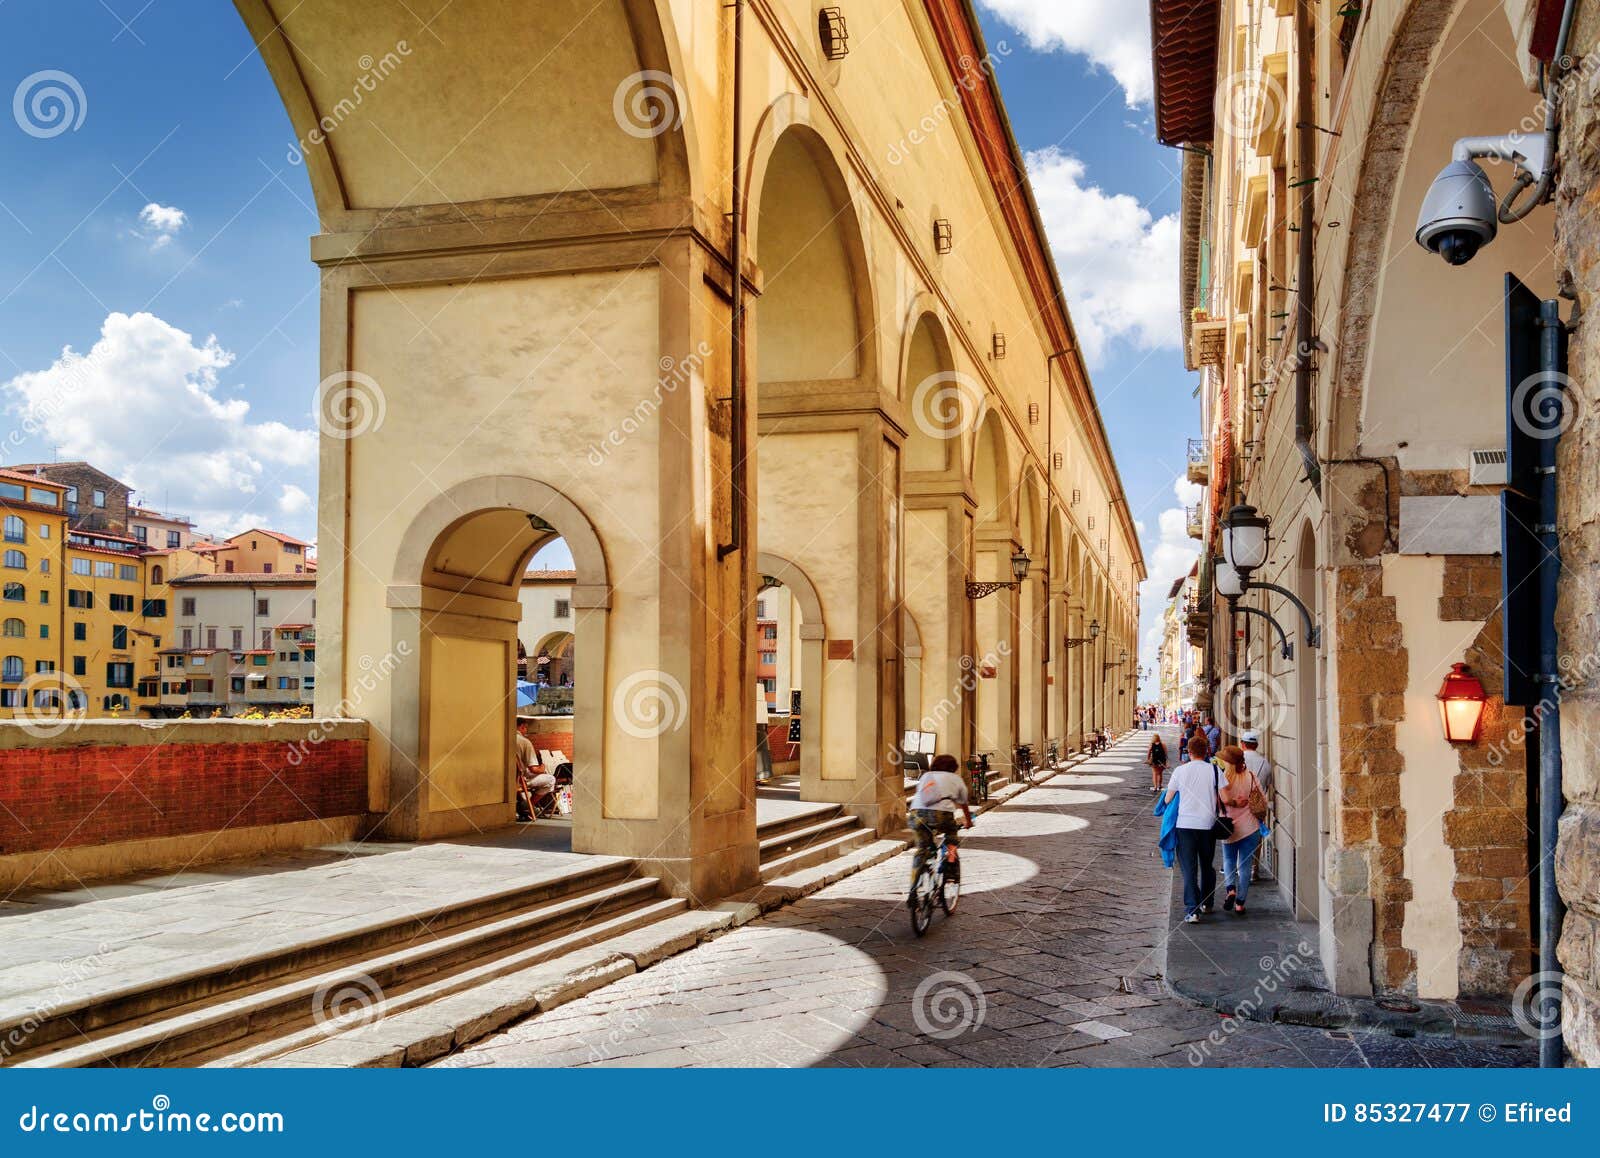 Arches Of The Vasari Corridor In Florence, Tuscany, Italy ...